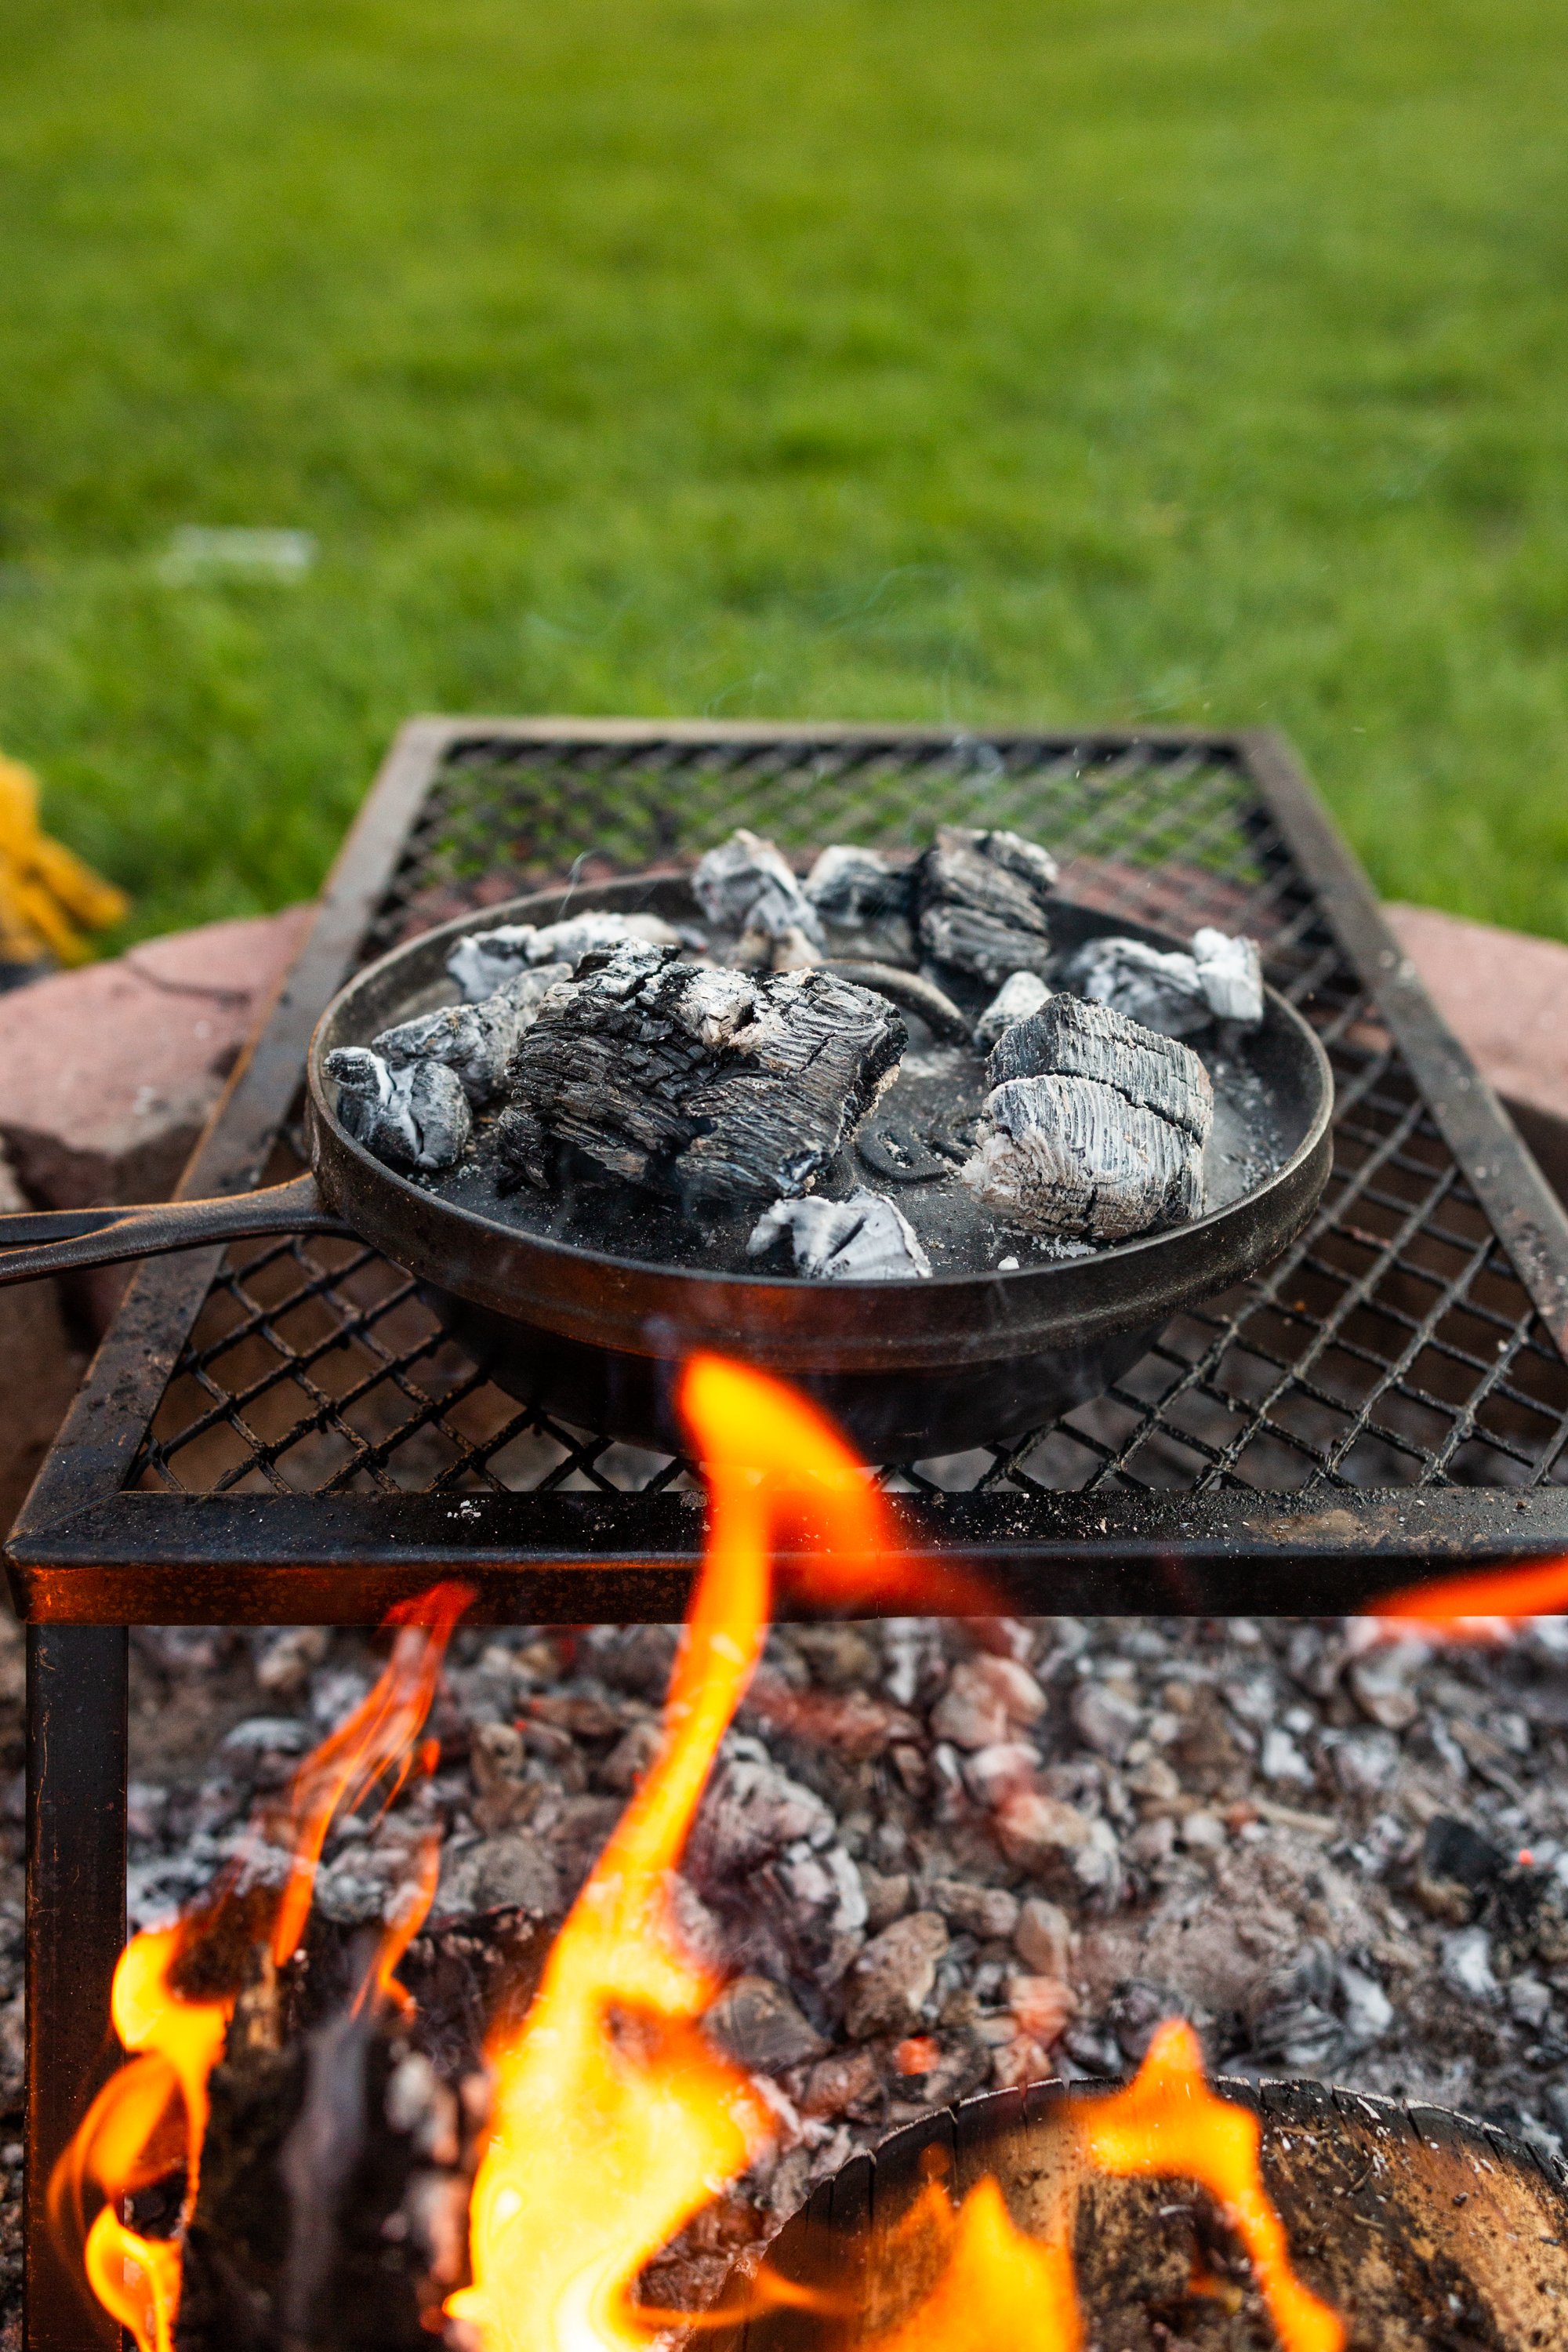 GET OUT! Try These Campfire Cooking Tips